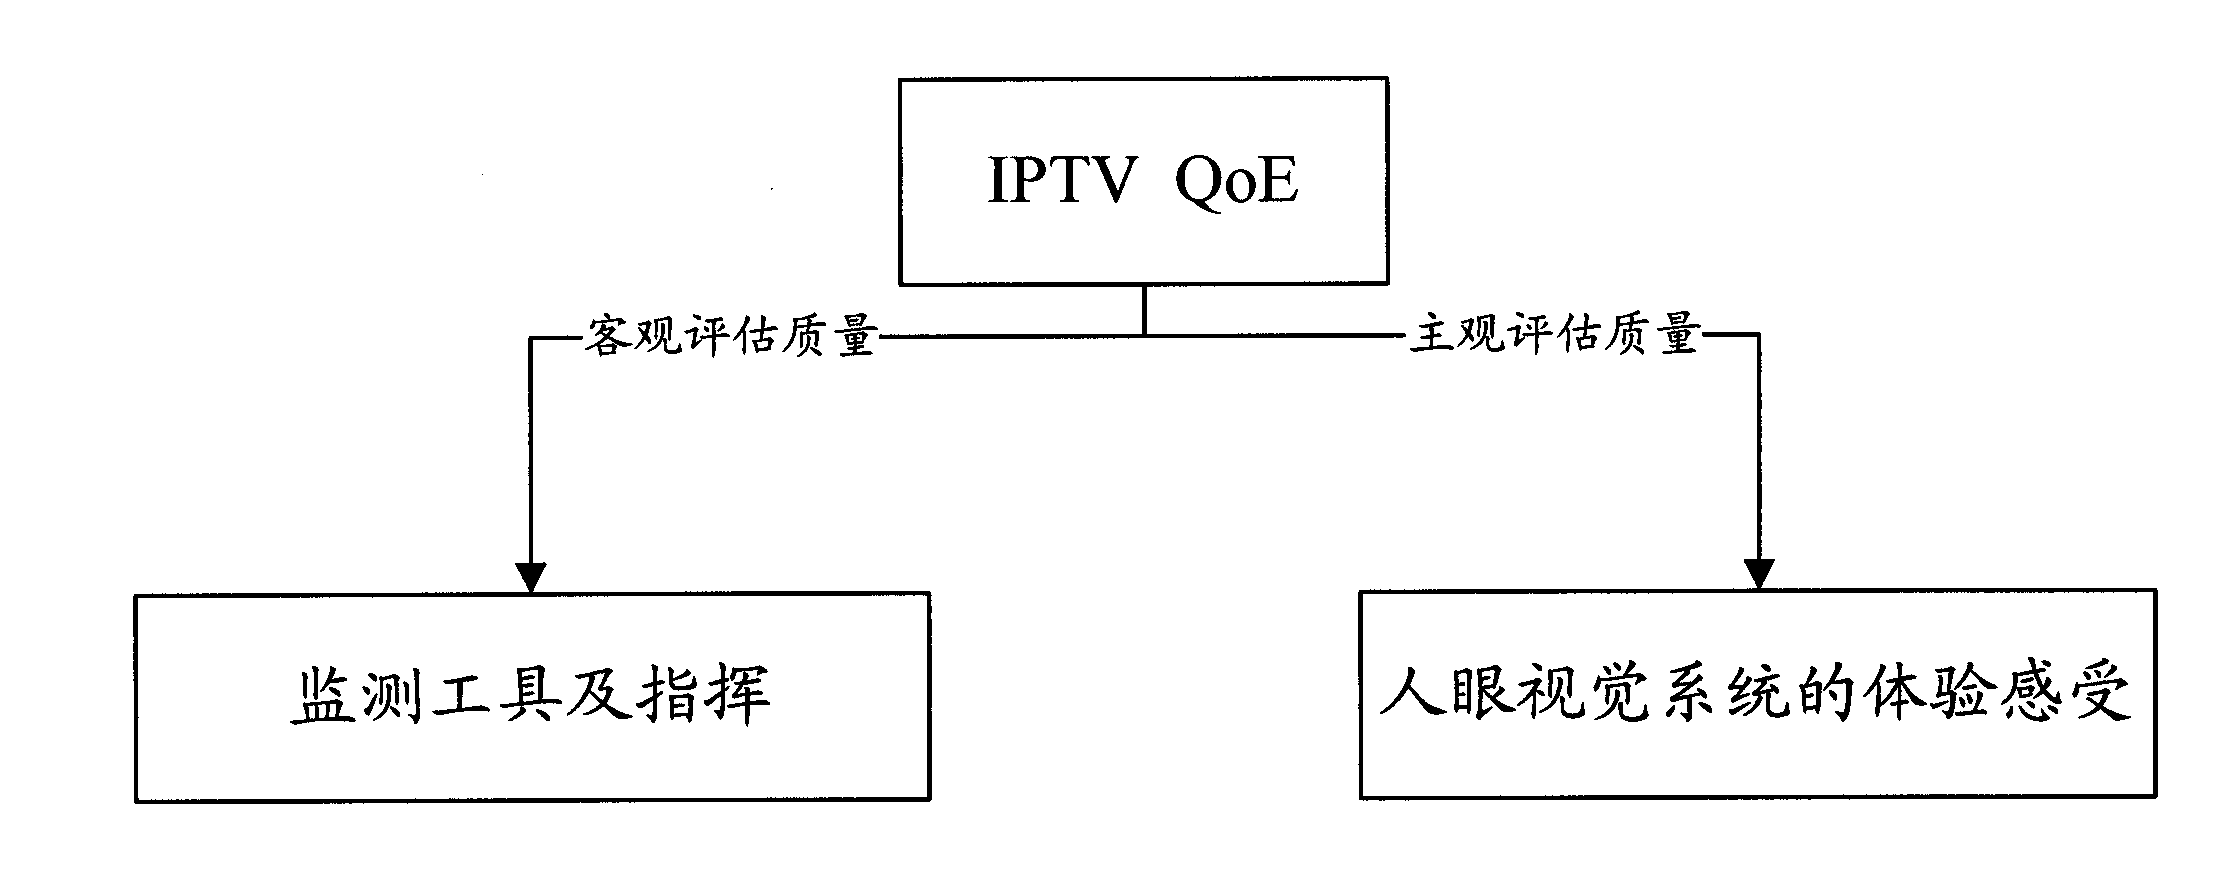 Device and method for estimating quality of experience (QoE) for internet protocol television (IPTV) user